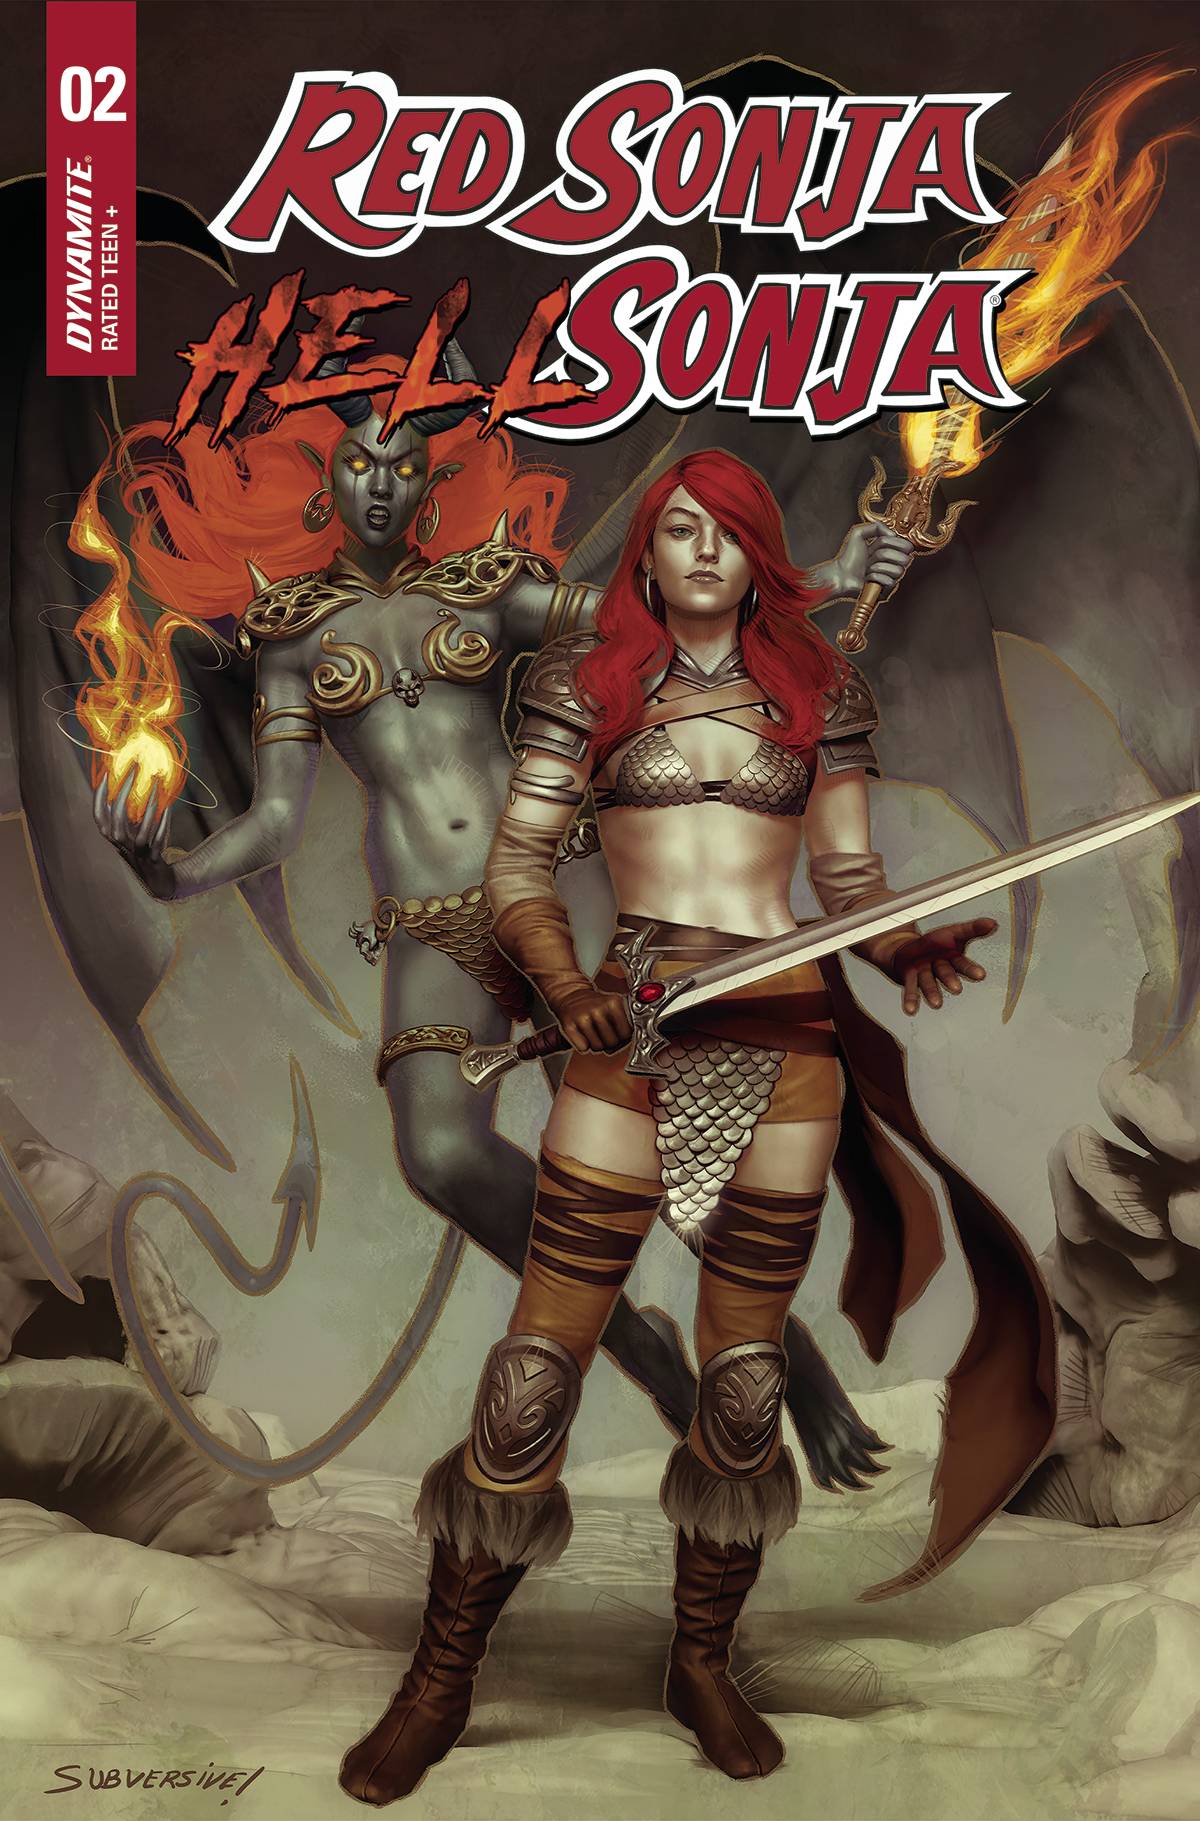 Red Sonja Hell Sonja #2 Cover A Puebla